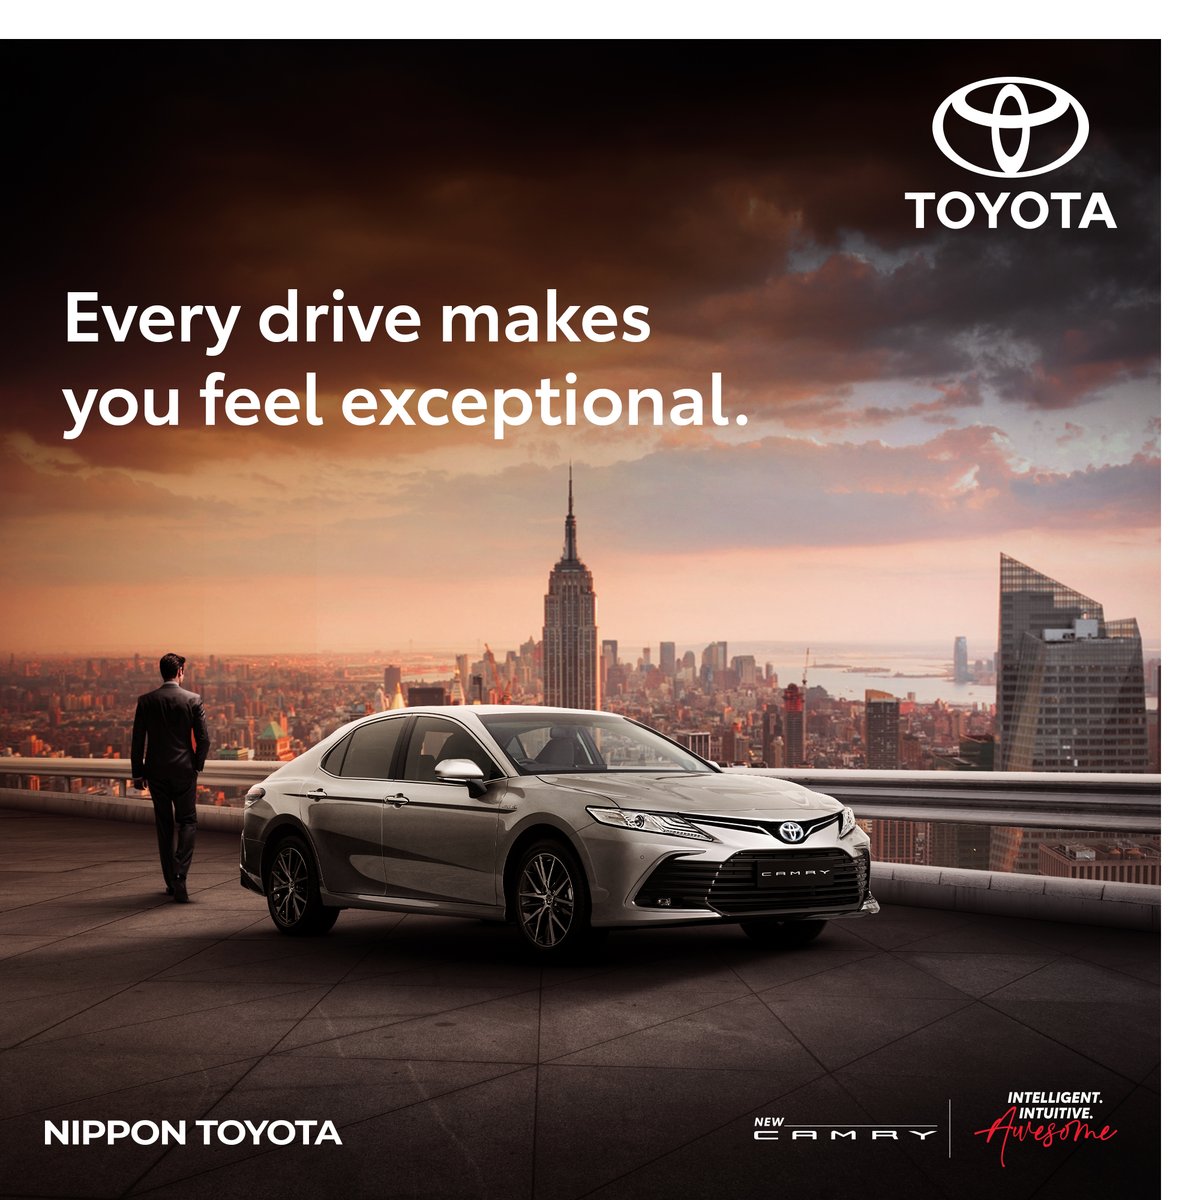 Every drive feels exceptional in the Camry. Experience unmatched comfort and style. Book your test drive at Nippon Toyota today!
#toyotacamry #drivehybrid♻️ #hybridsynergydrive #newhybrid #sustainability #LuxuryLifestyle